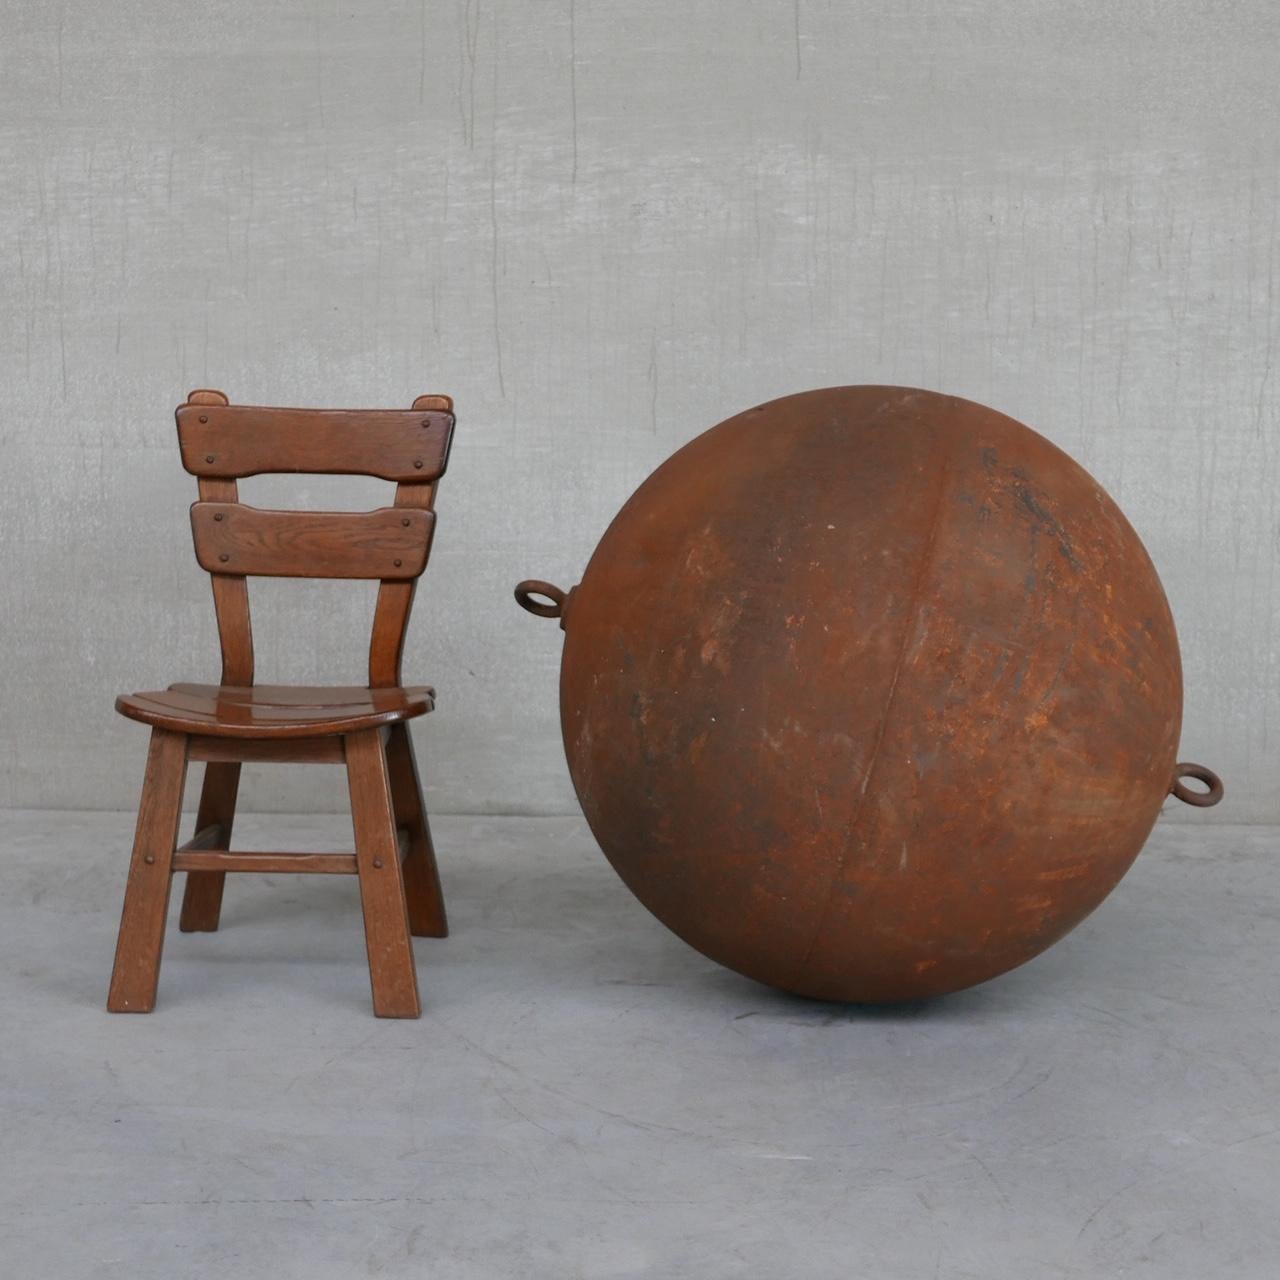 A huge metre wide metal circular ball likely to be a buoy or the like. 

Hard to age but likely France, c1920s. 

Great condition with an amazing patina. 

Each end has a hanging ring.

Location: Belgium Gallery. 

Dimensions: 110 height x